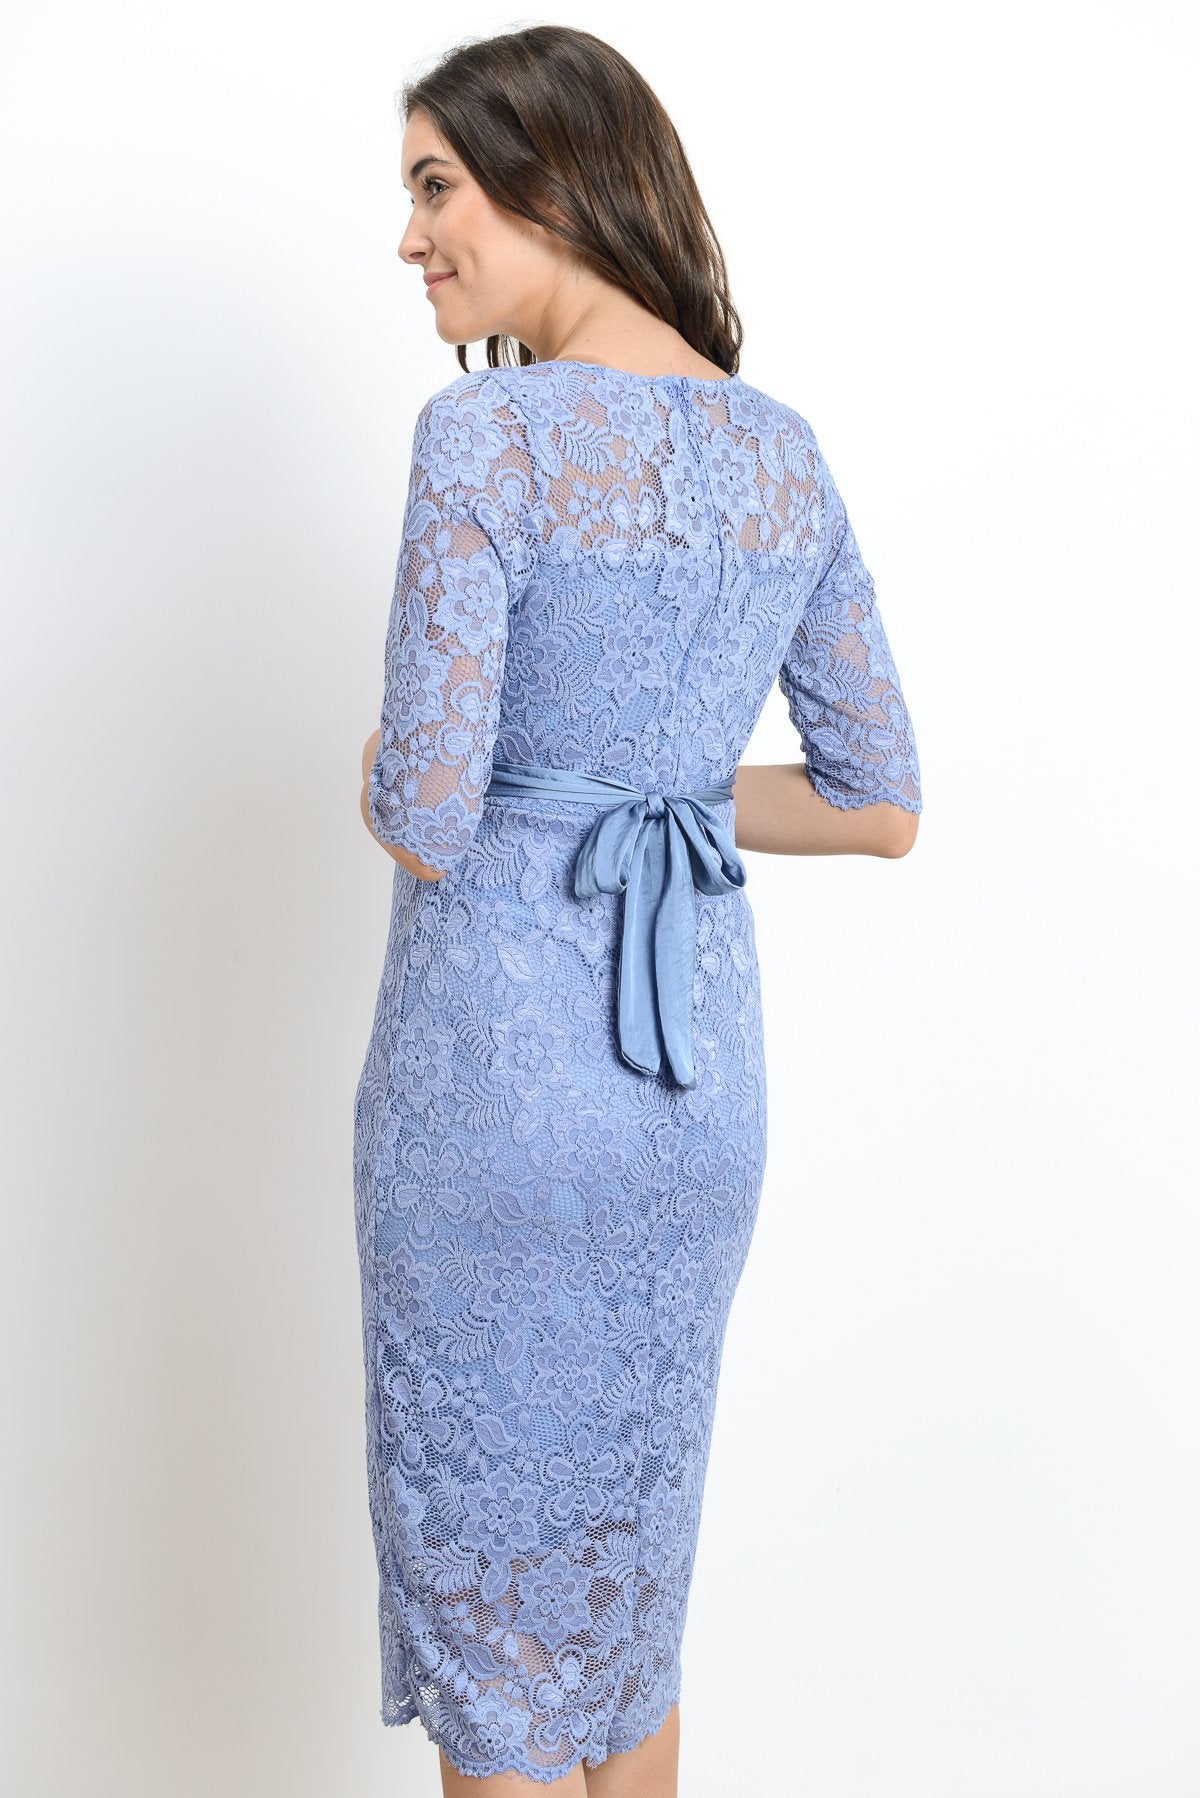 Lace with Ribbon Tie Maternity Dress